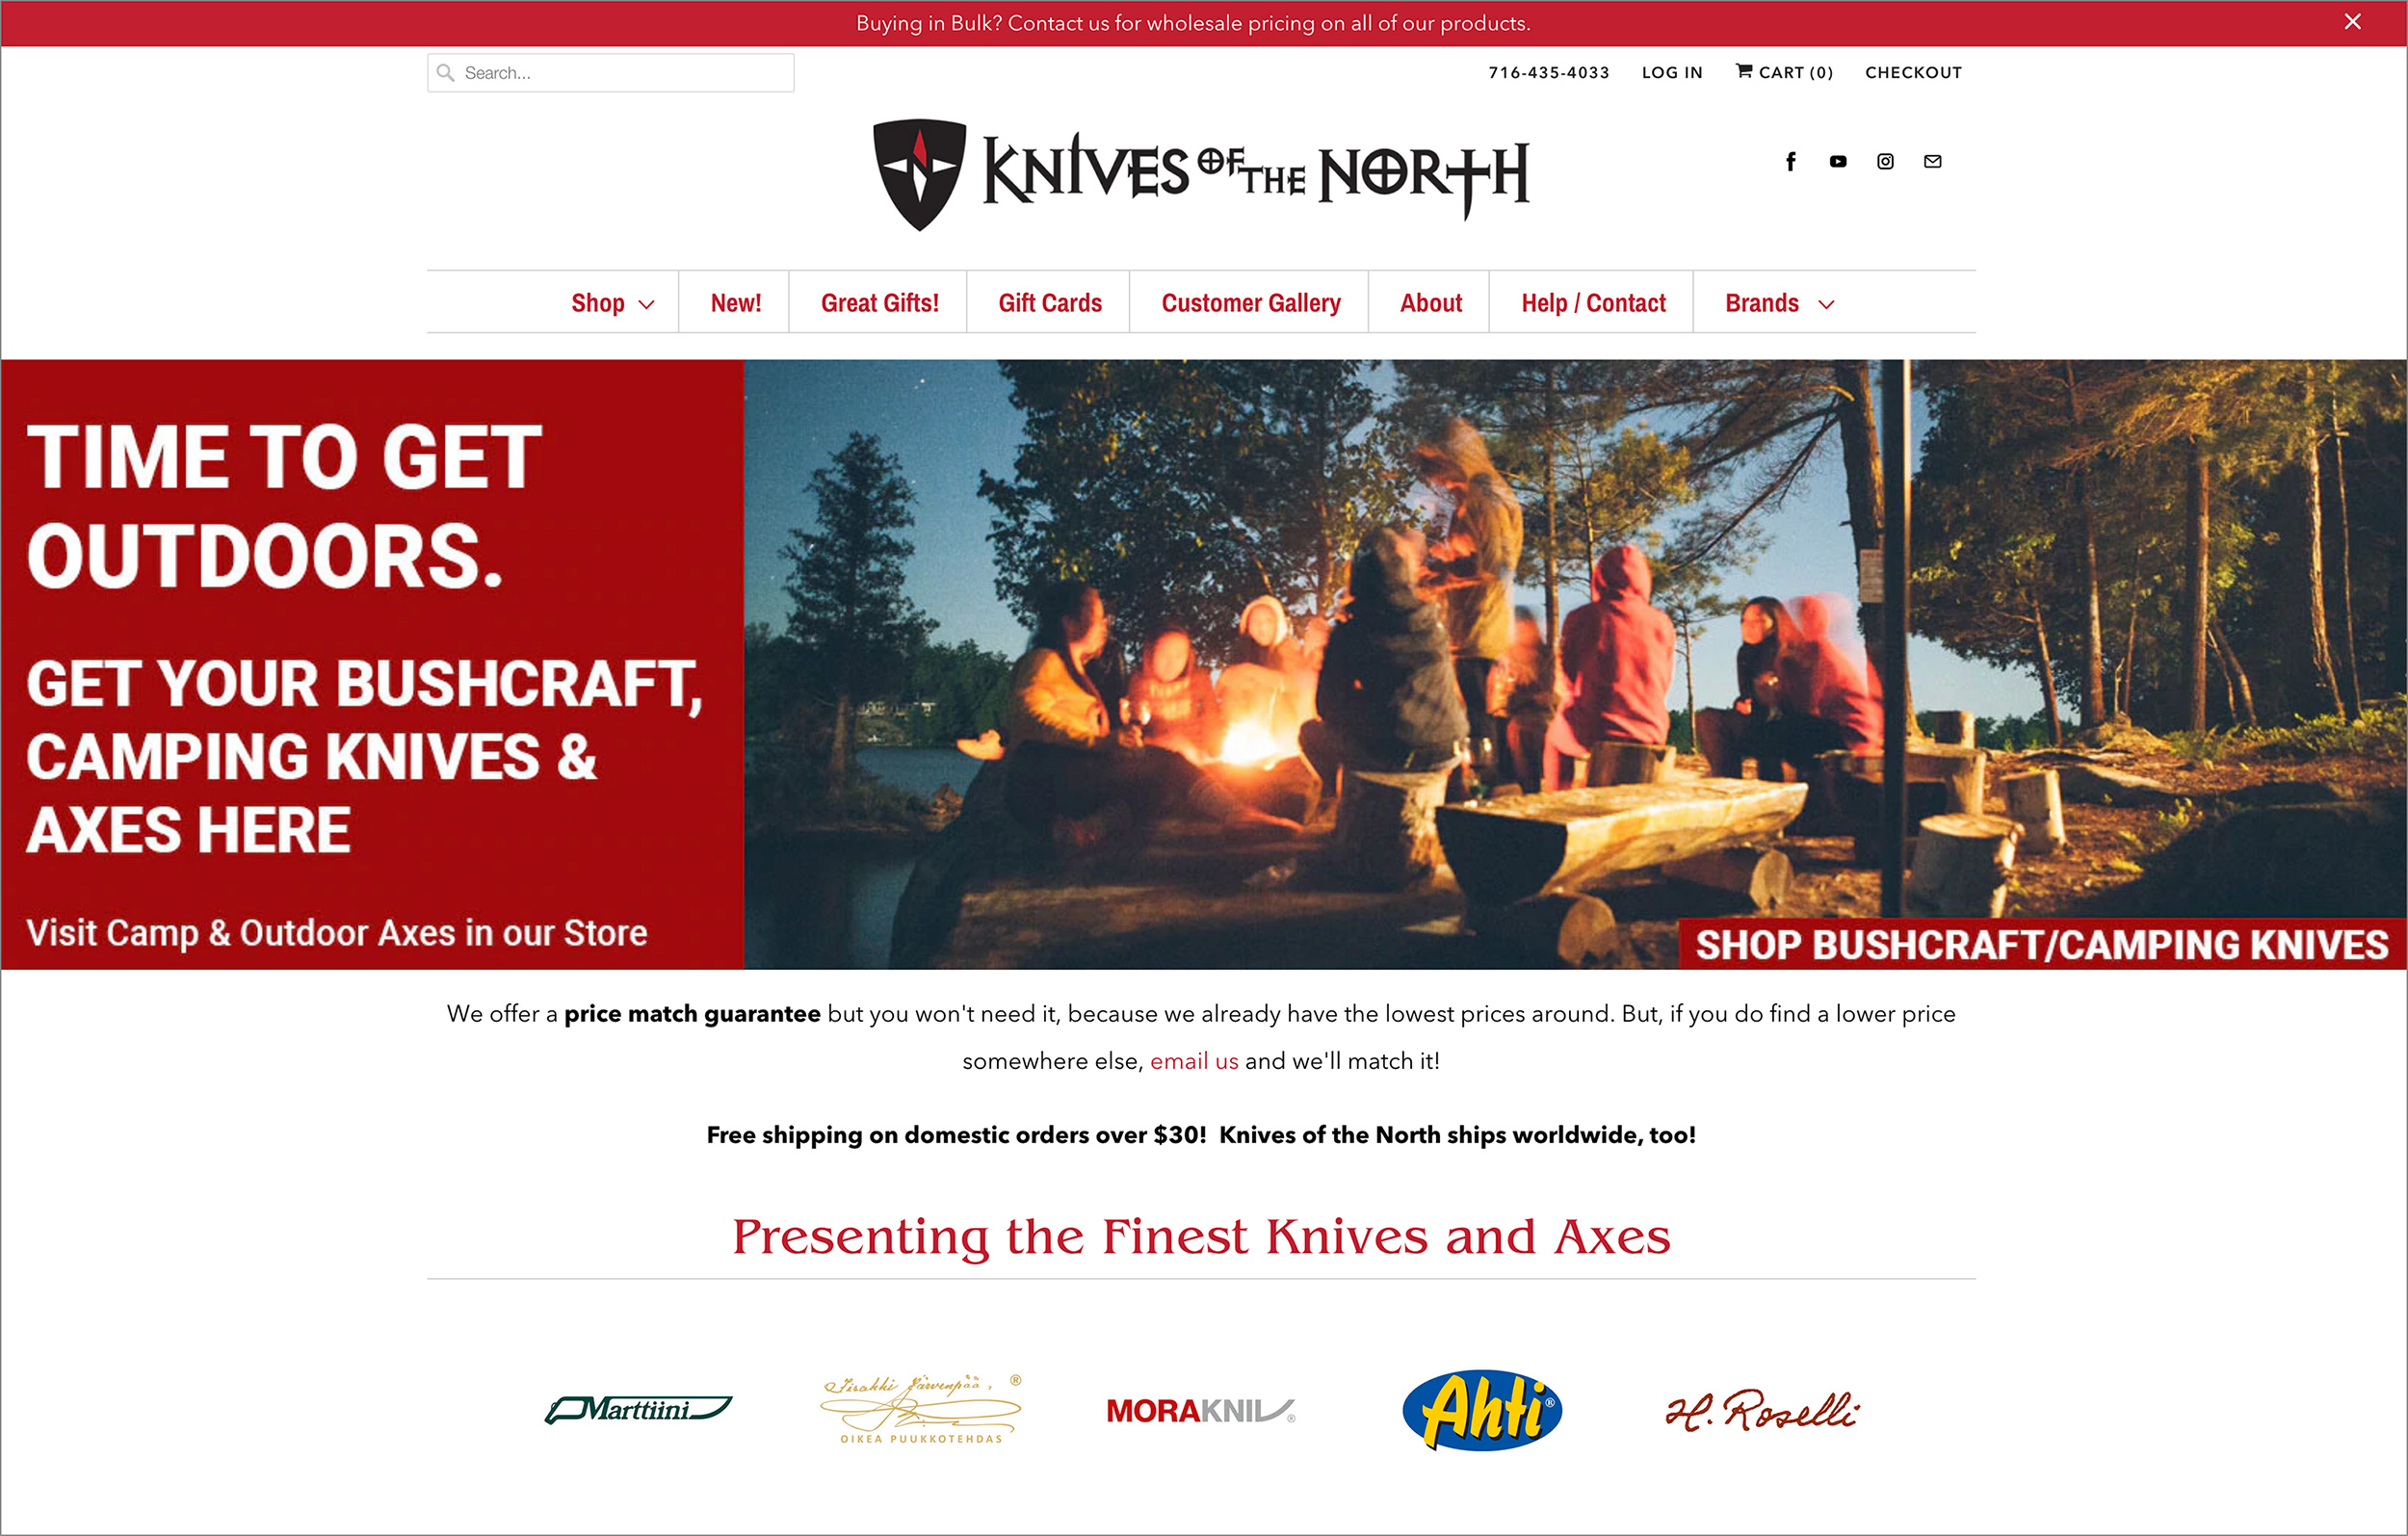 Knives of the North home page screen shot